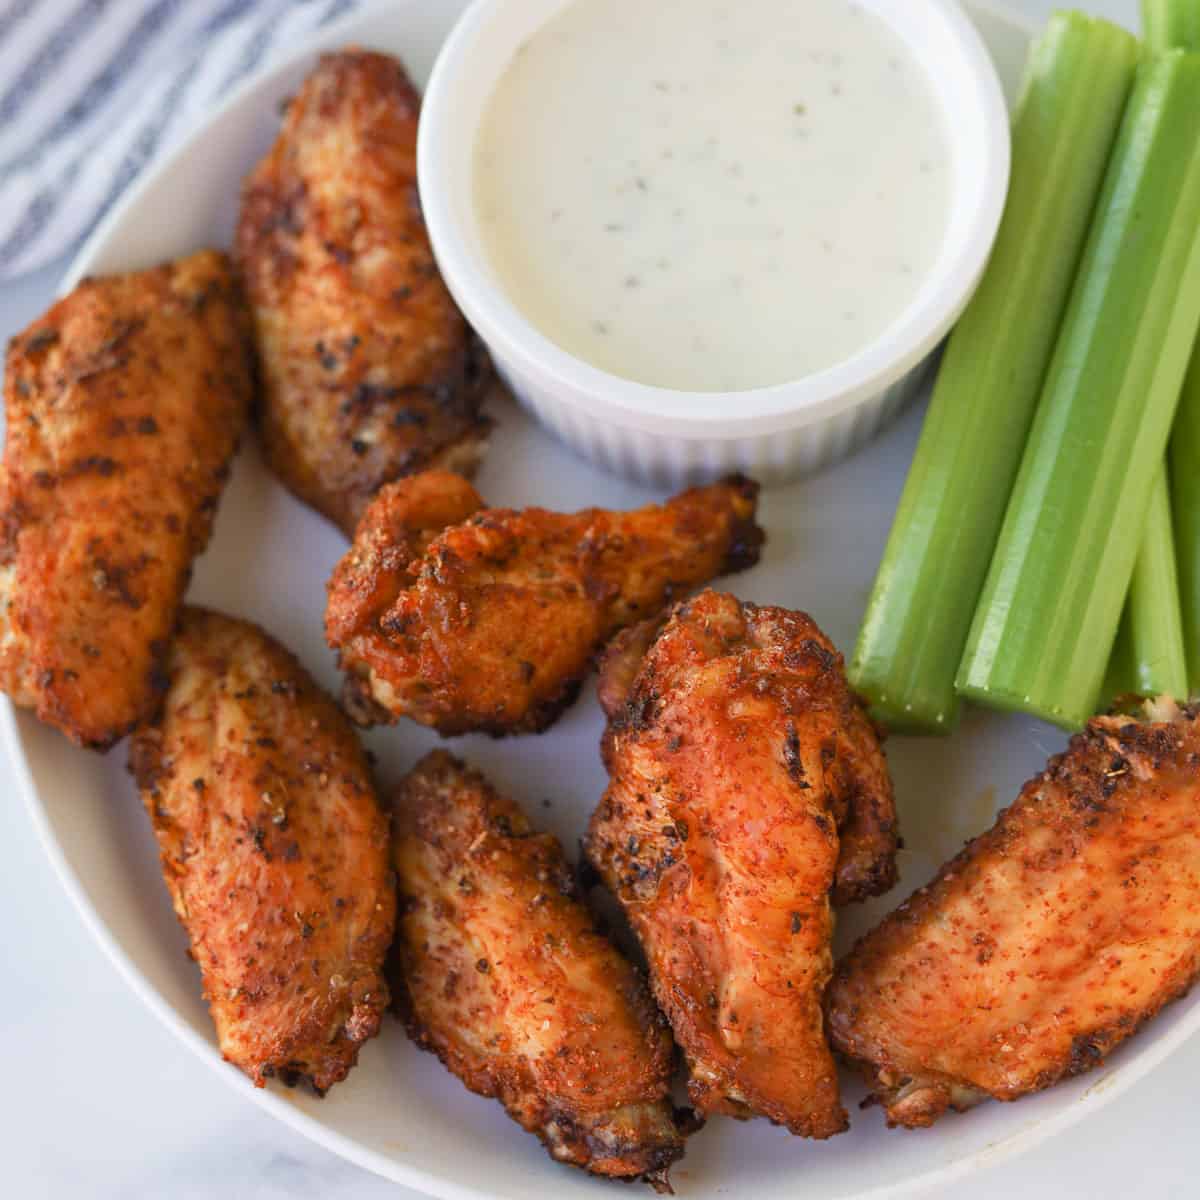 https://apeachyplate.com/wp-content/uploads/2022/02/air-fryer-chicken-wings-dry-rub-square.jpg